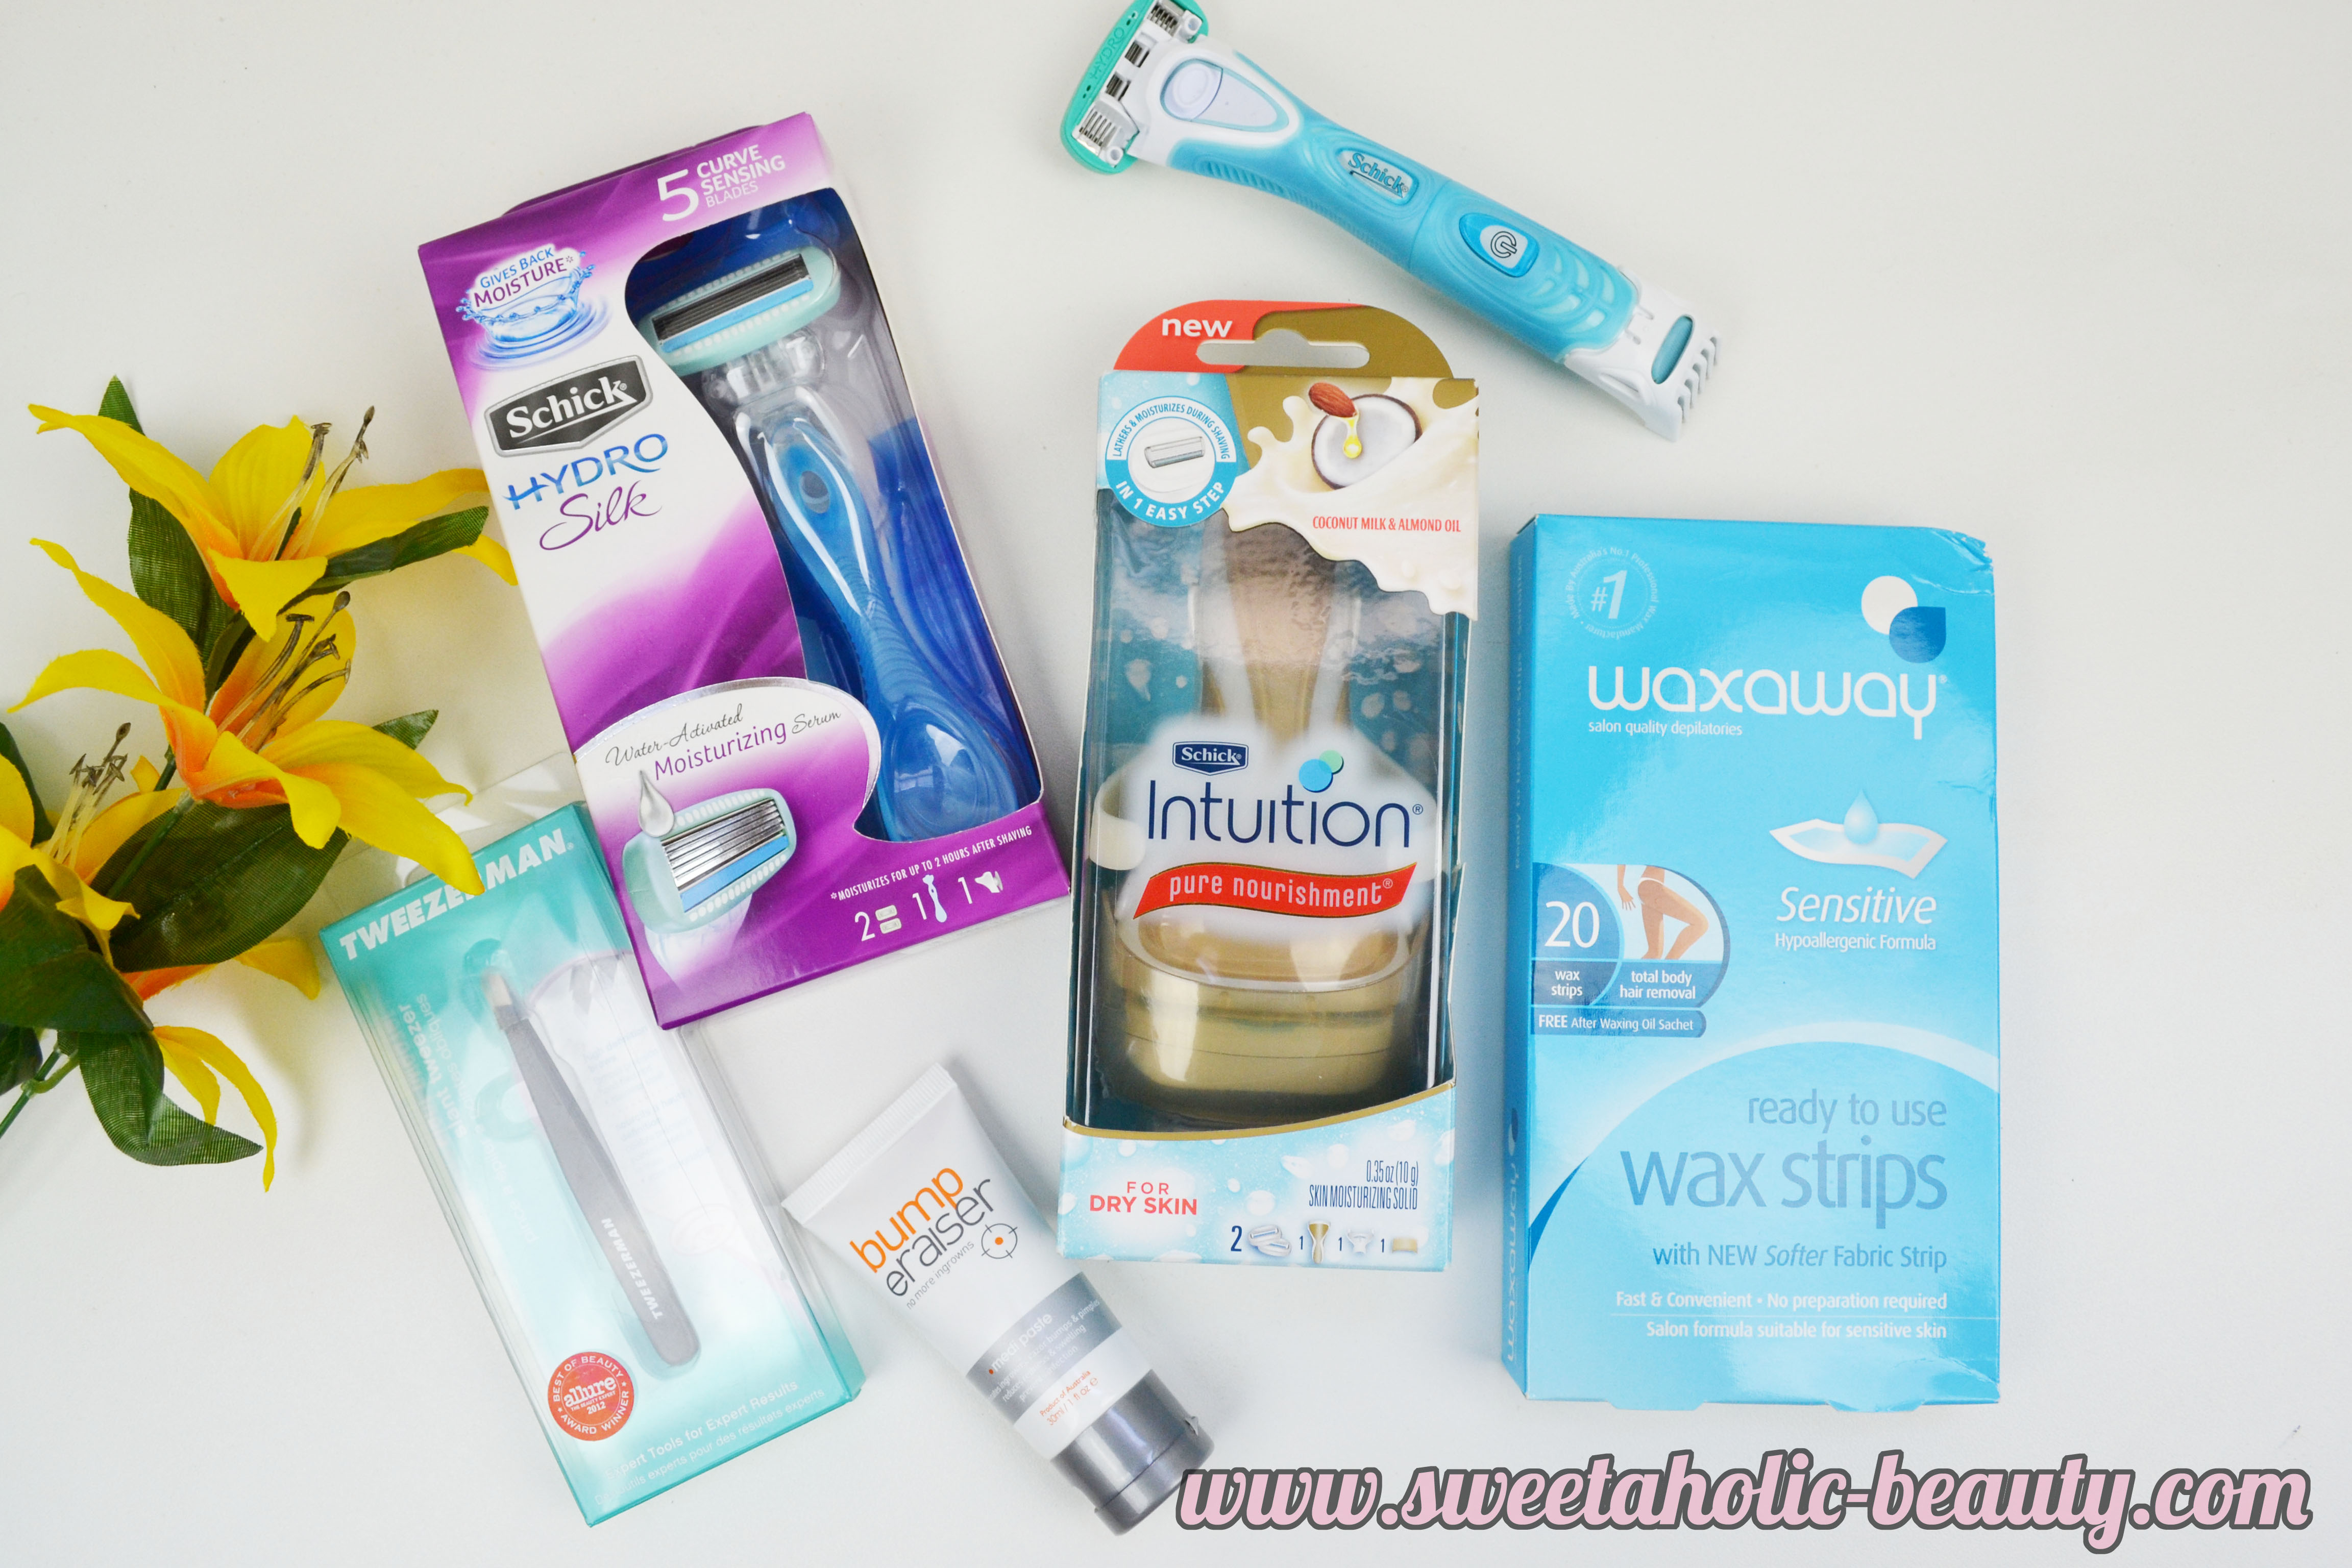 Hair Removal Solutions - Sweetaholic Beauty